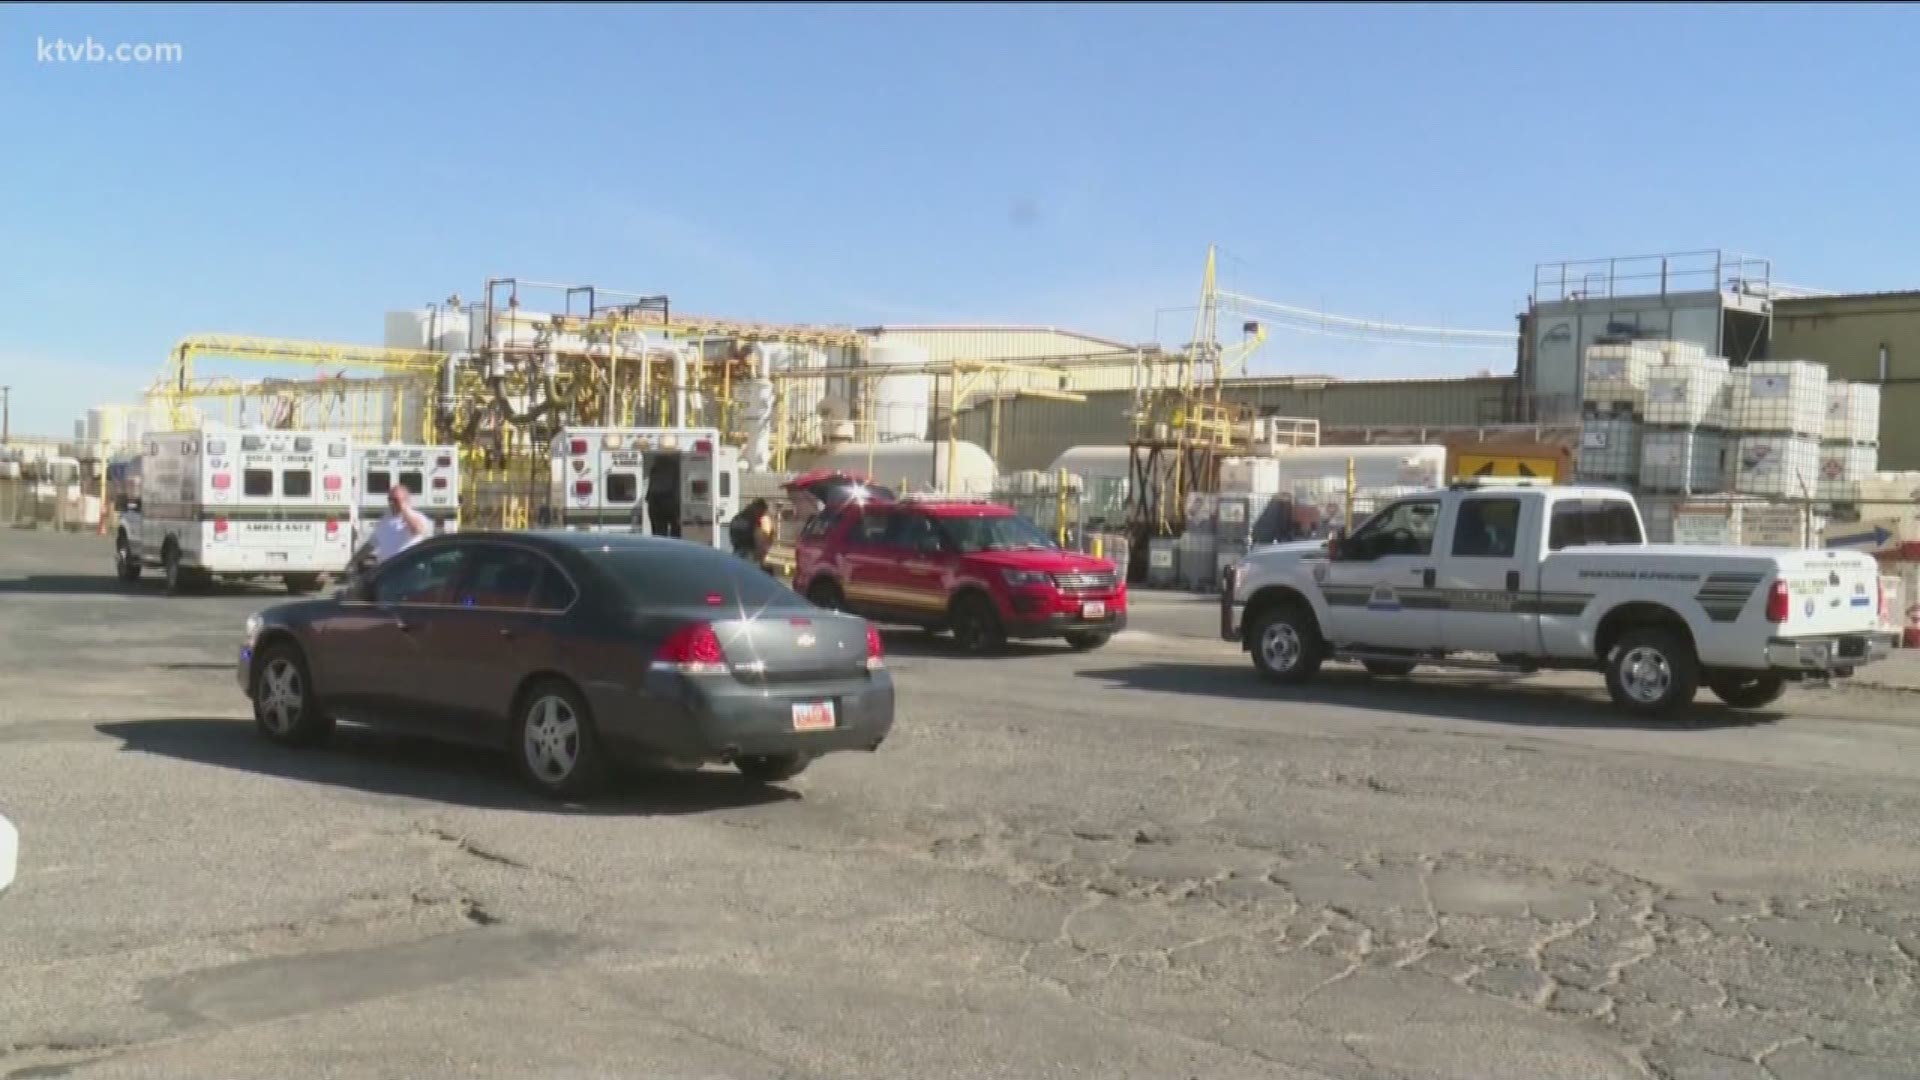 Fire officials estimate that 300-400 gallons of sulfur dioxide leaked out of a rail car.